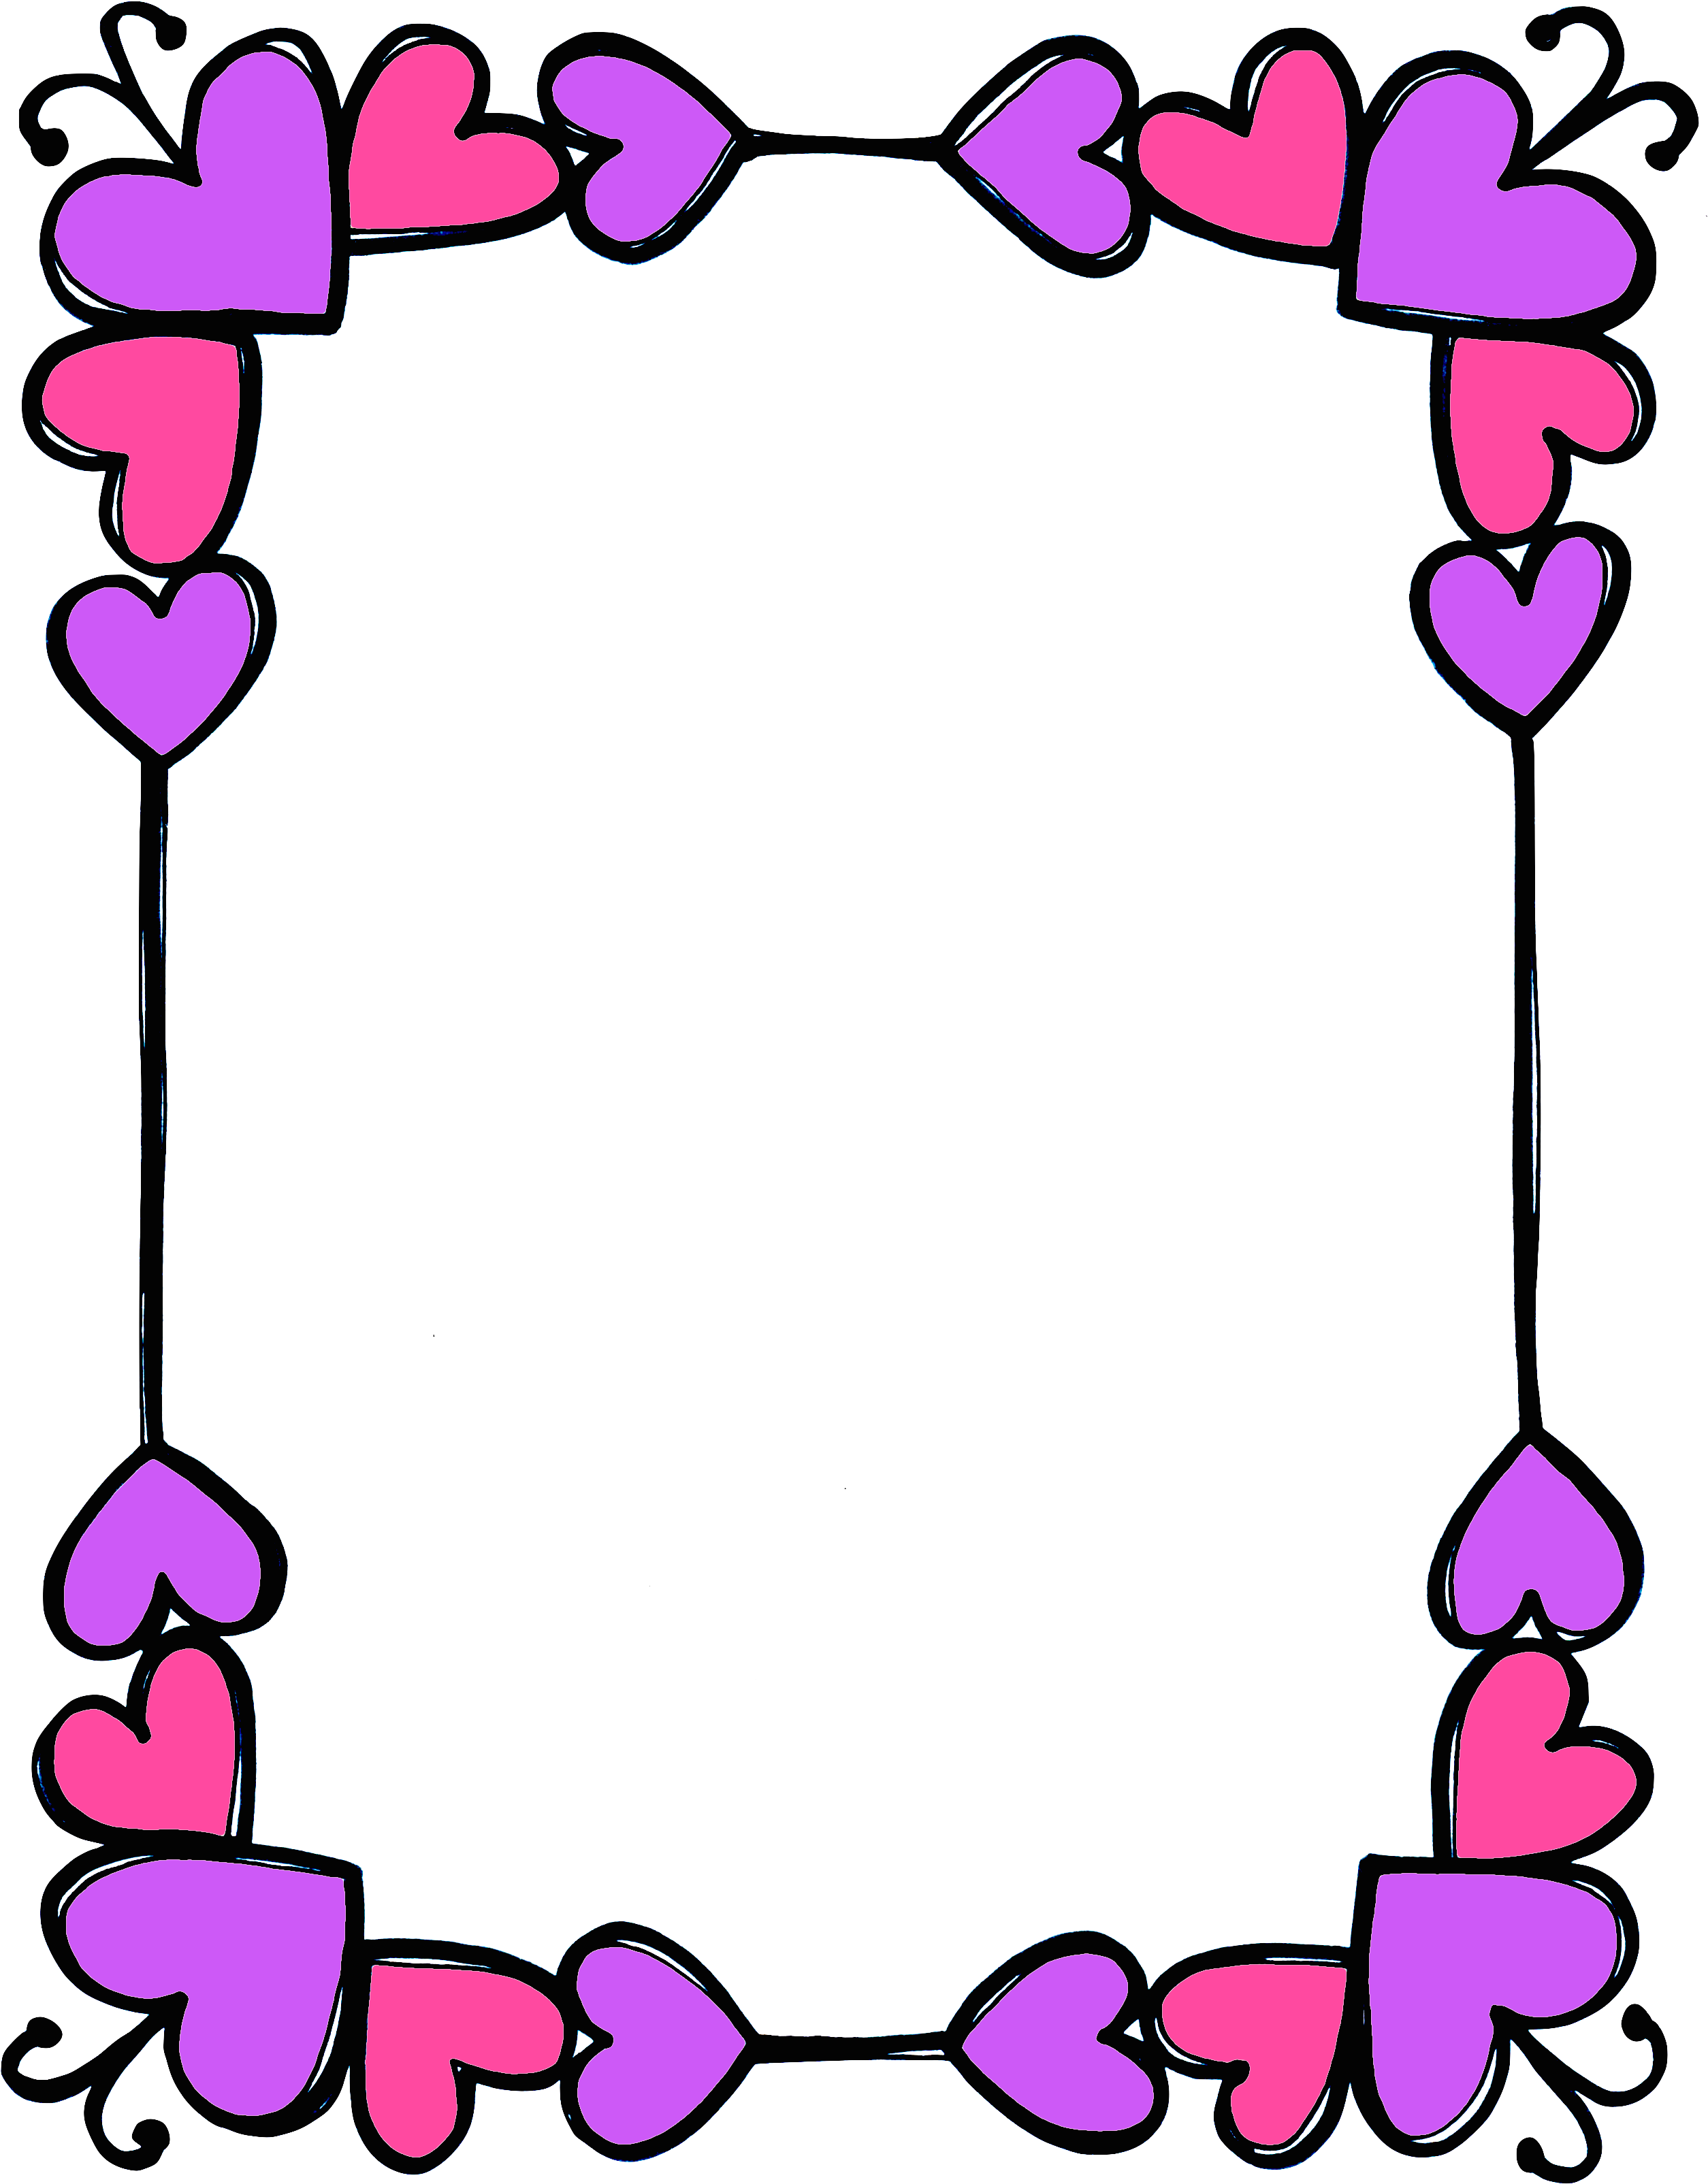 A Frame Of Hearts